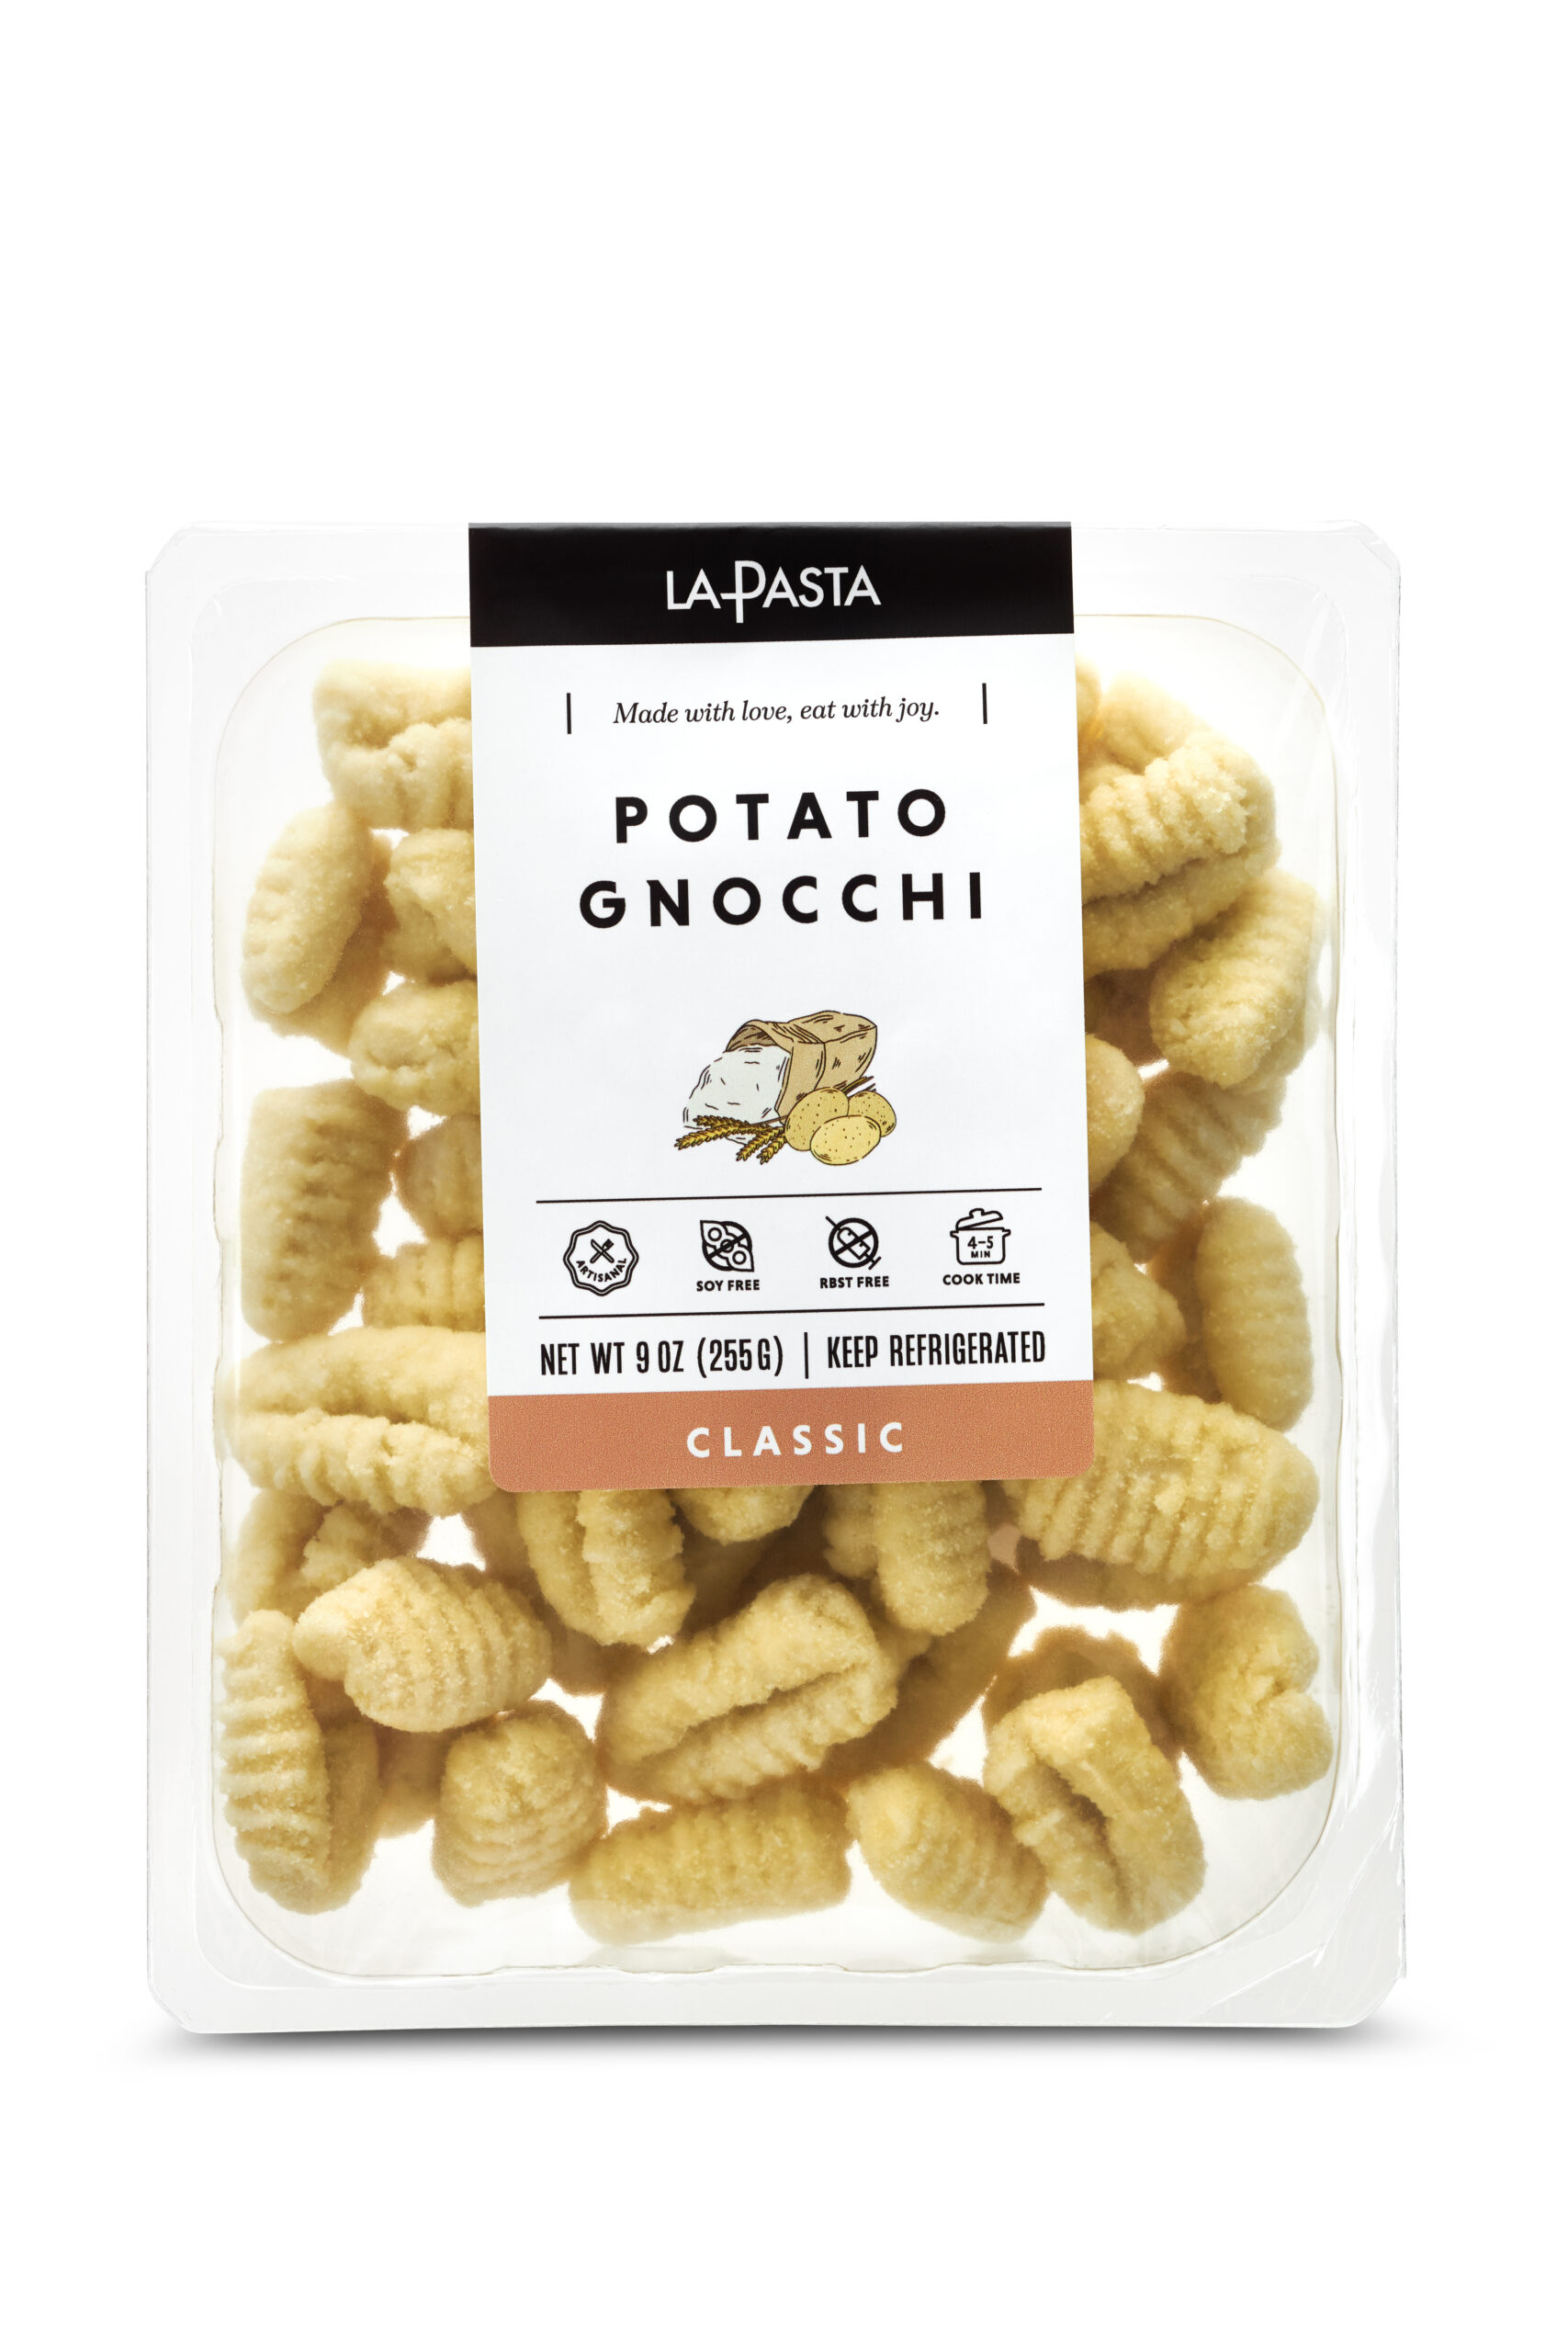 A package of potato gnocchi is shown.